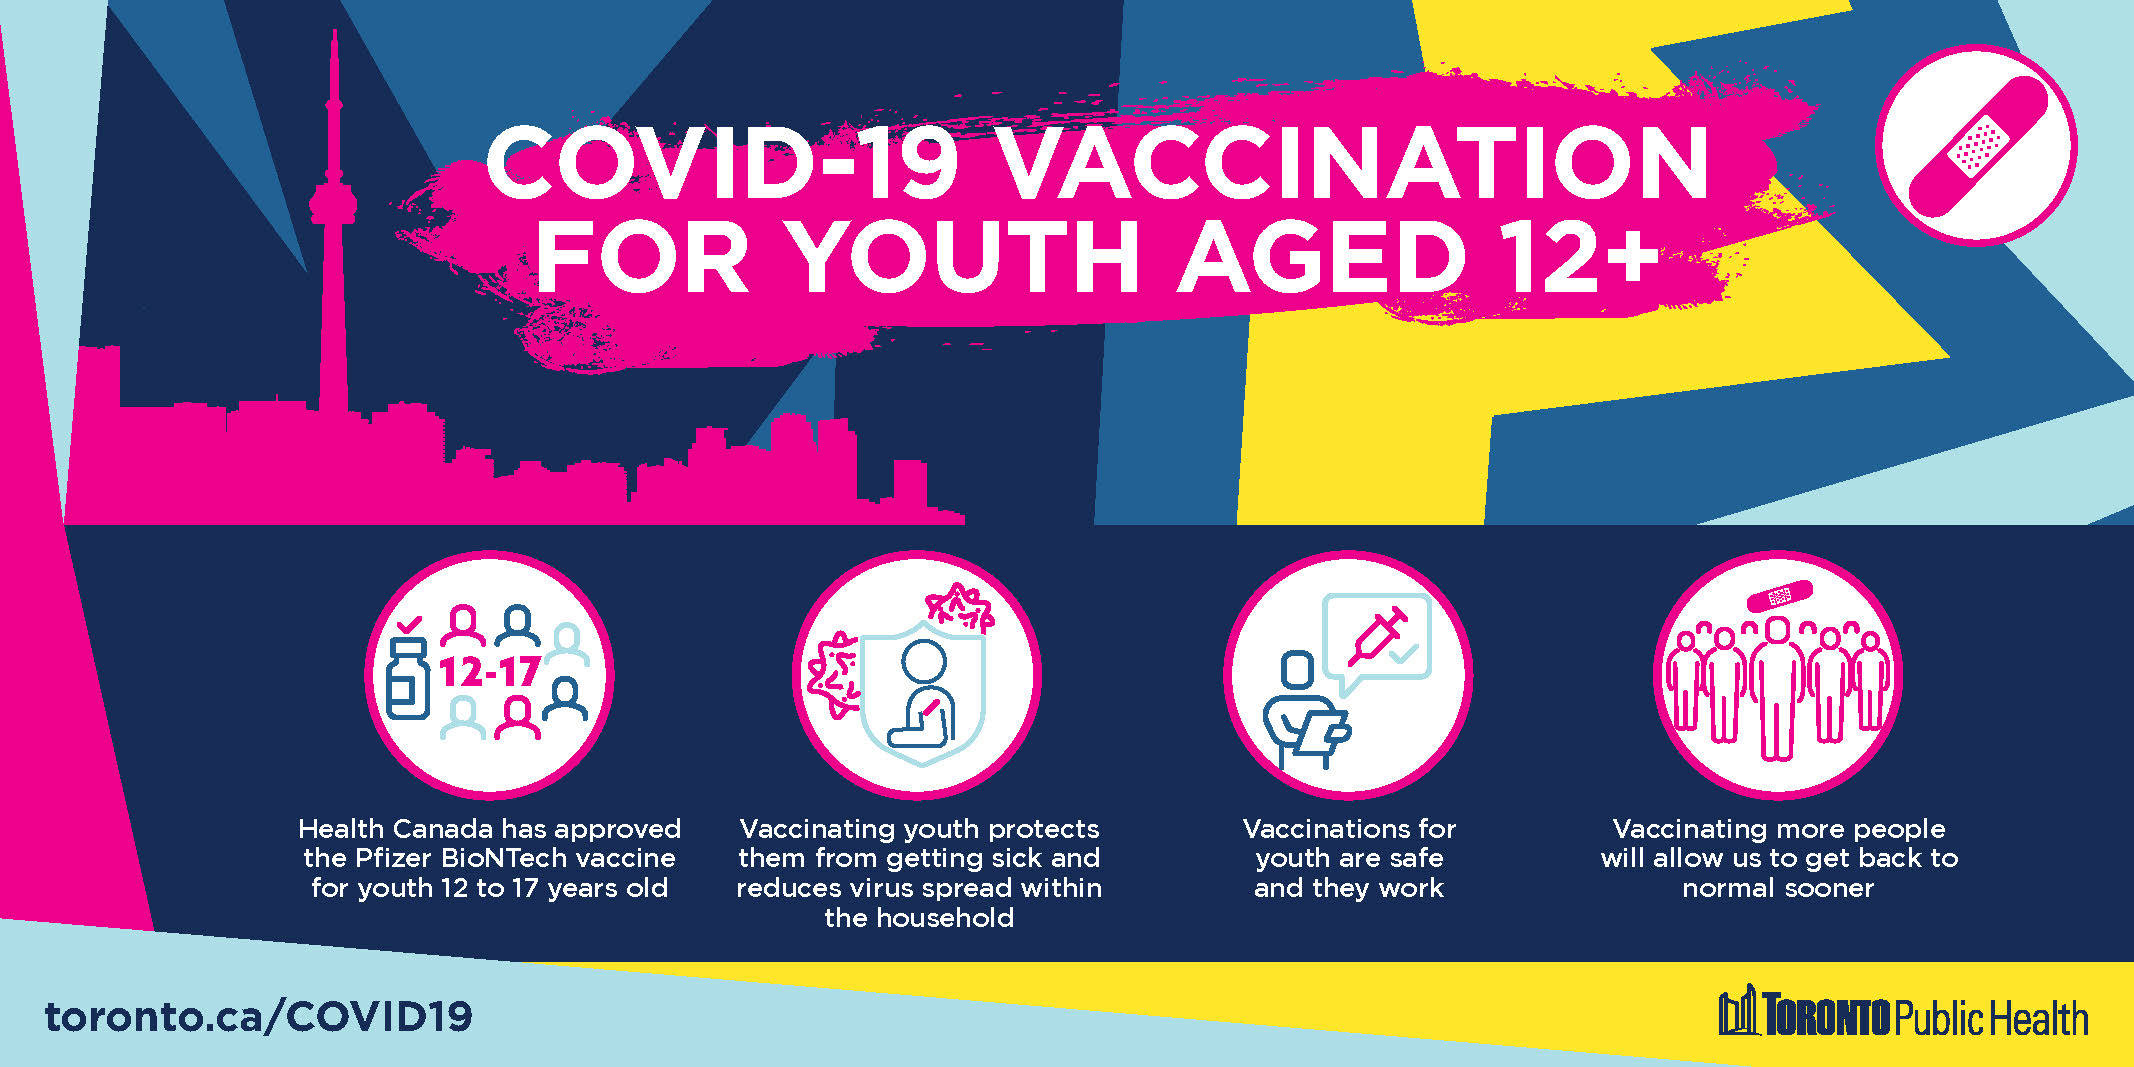 Covid19-Vaccine-for-Youth-12